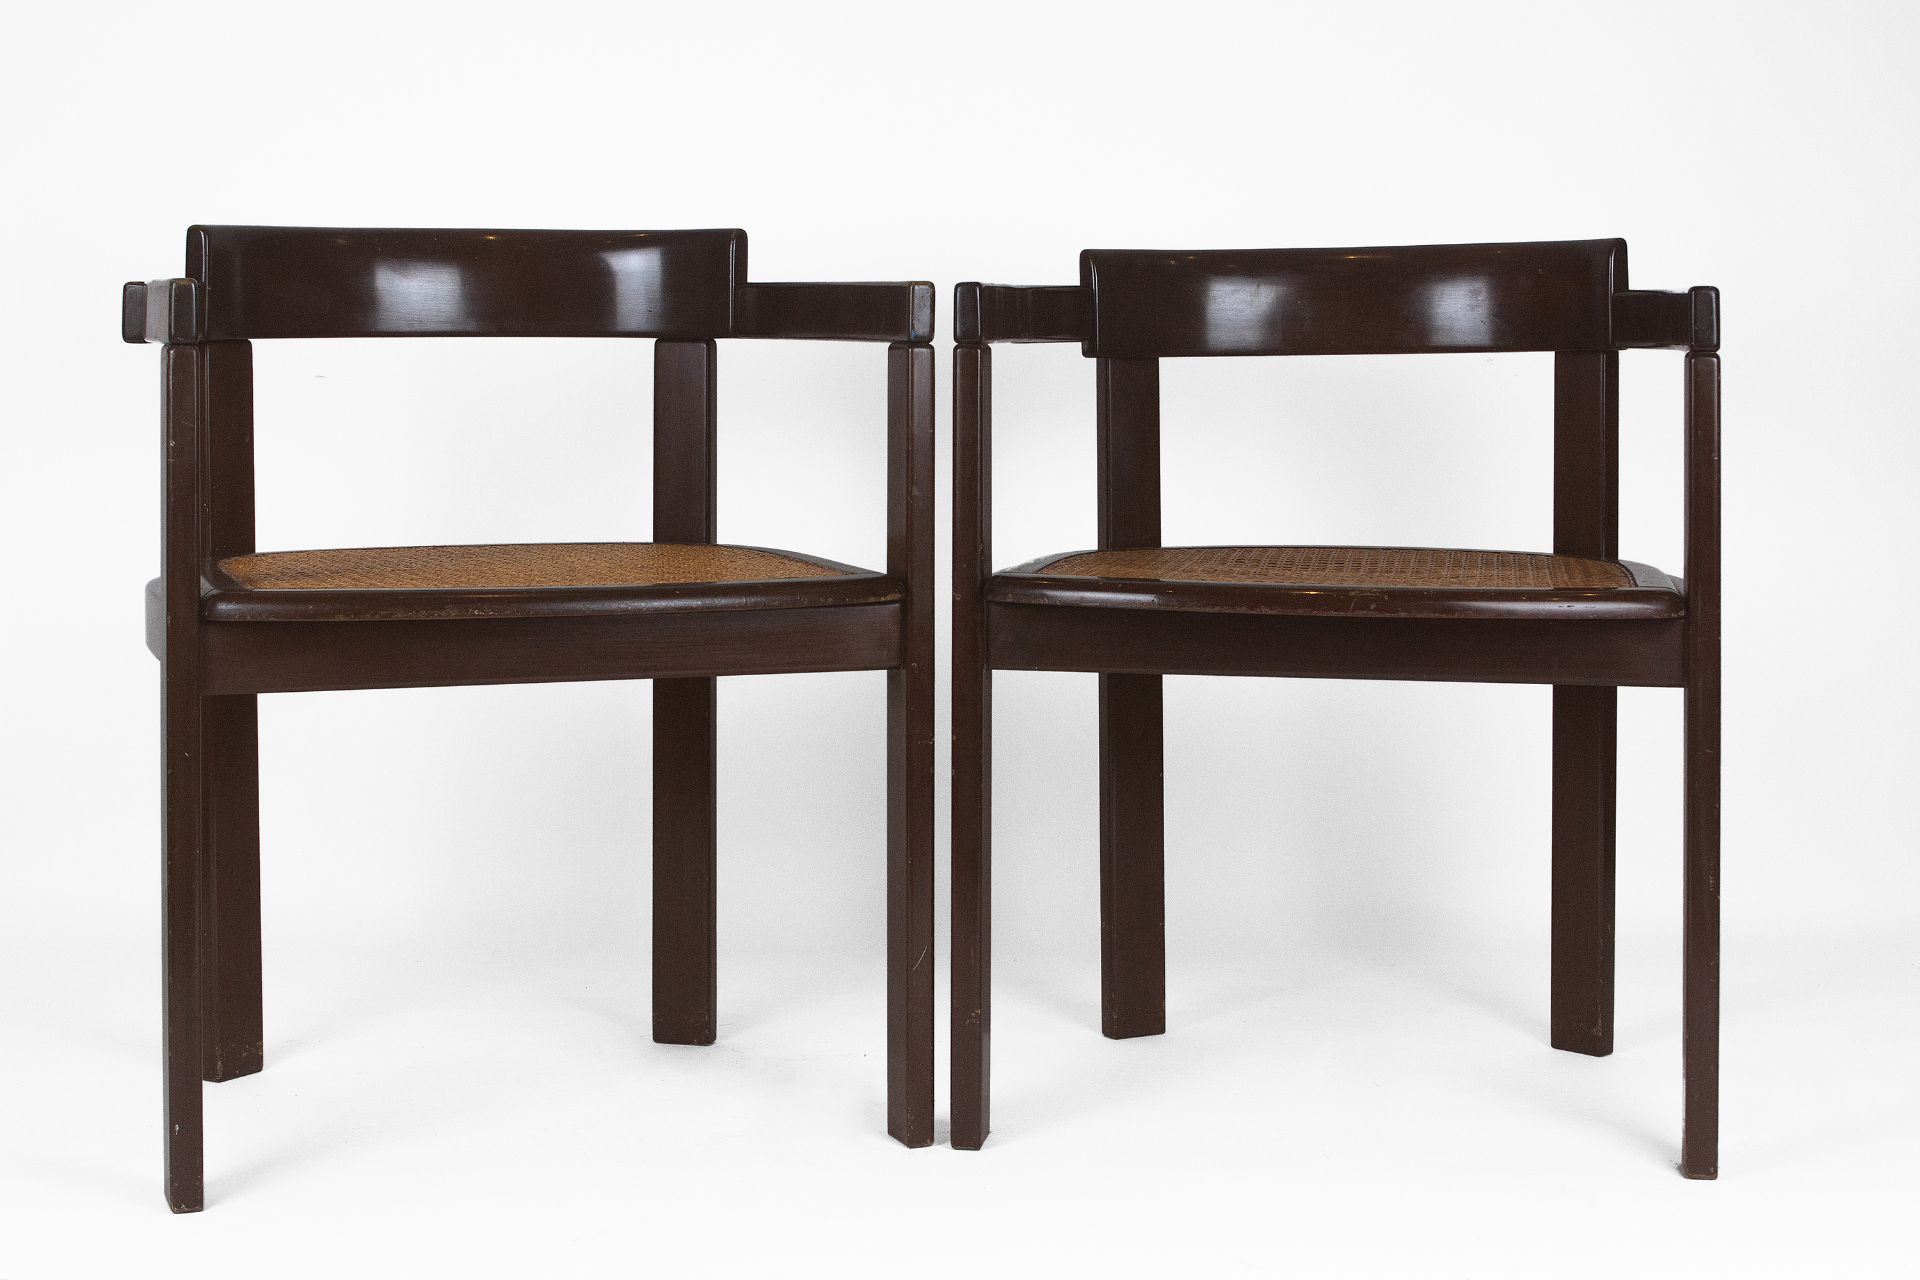 Gregorio Vicente Cortés, 1967. A pair of chairs